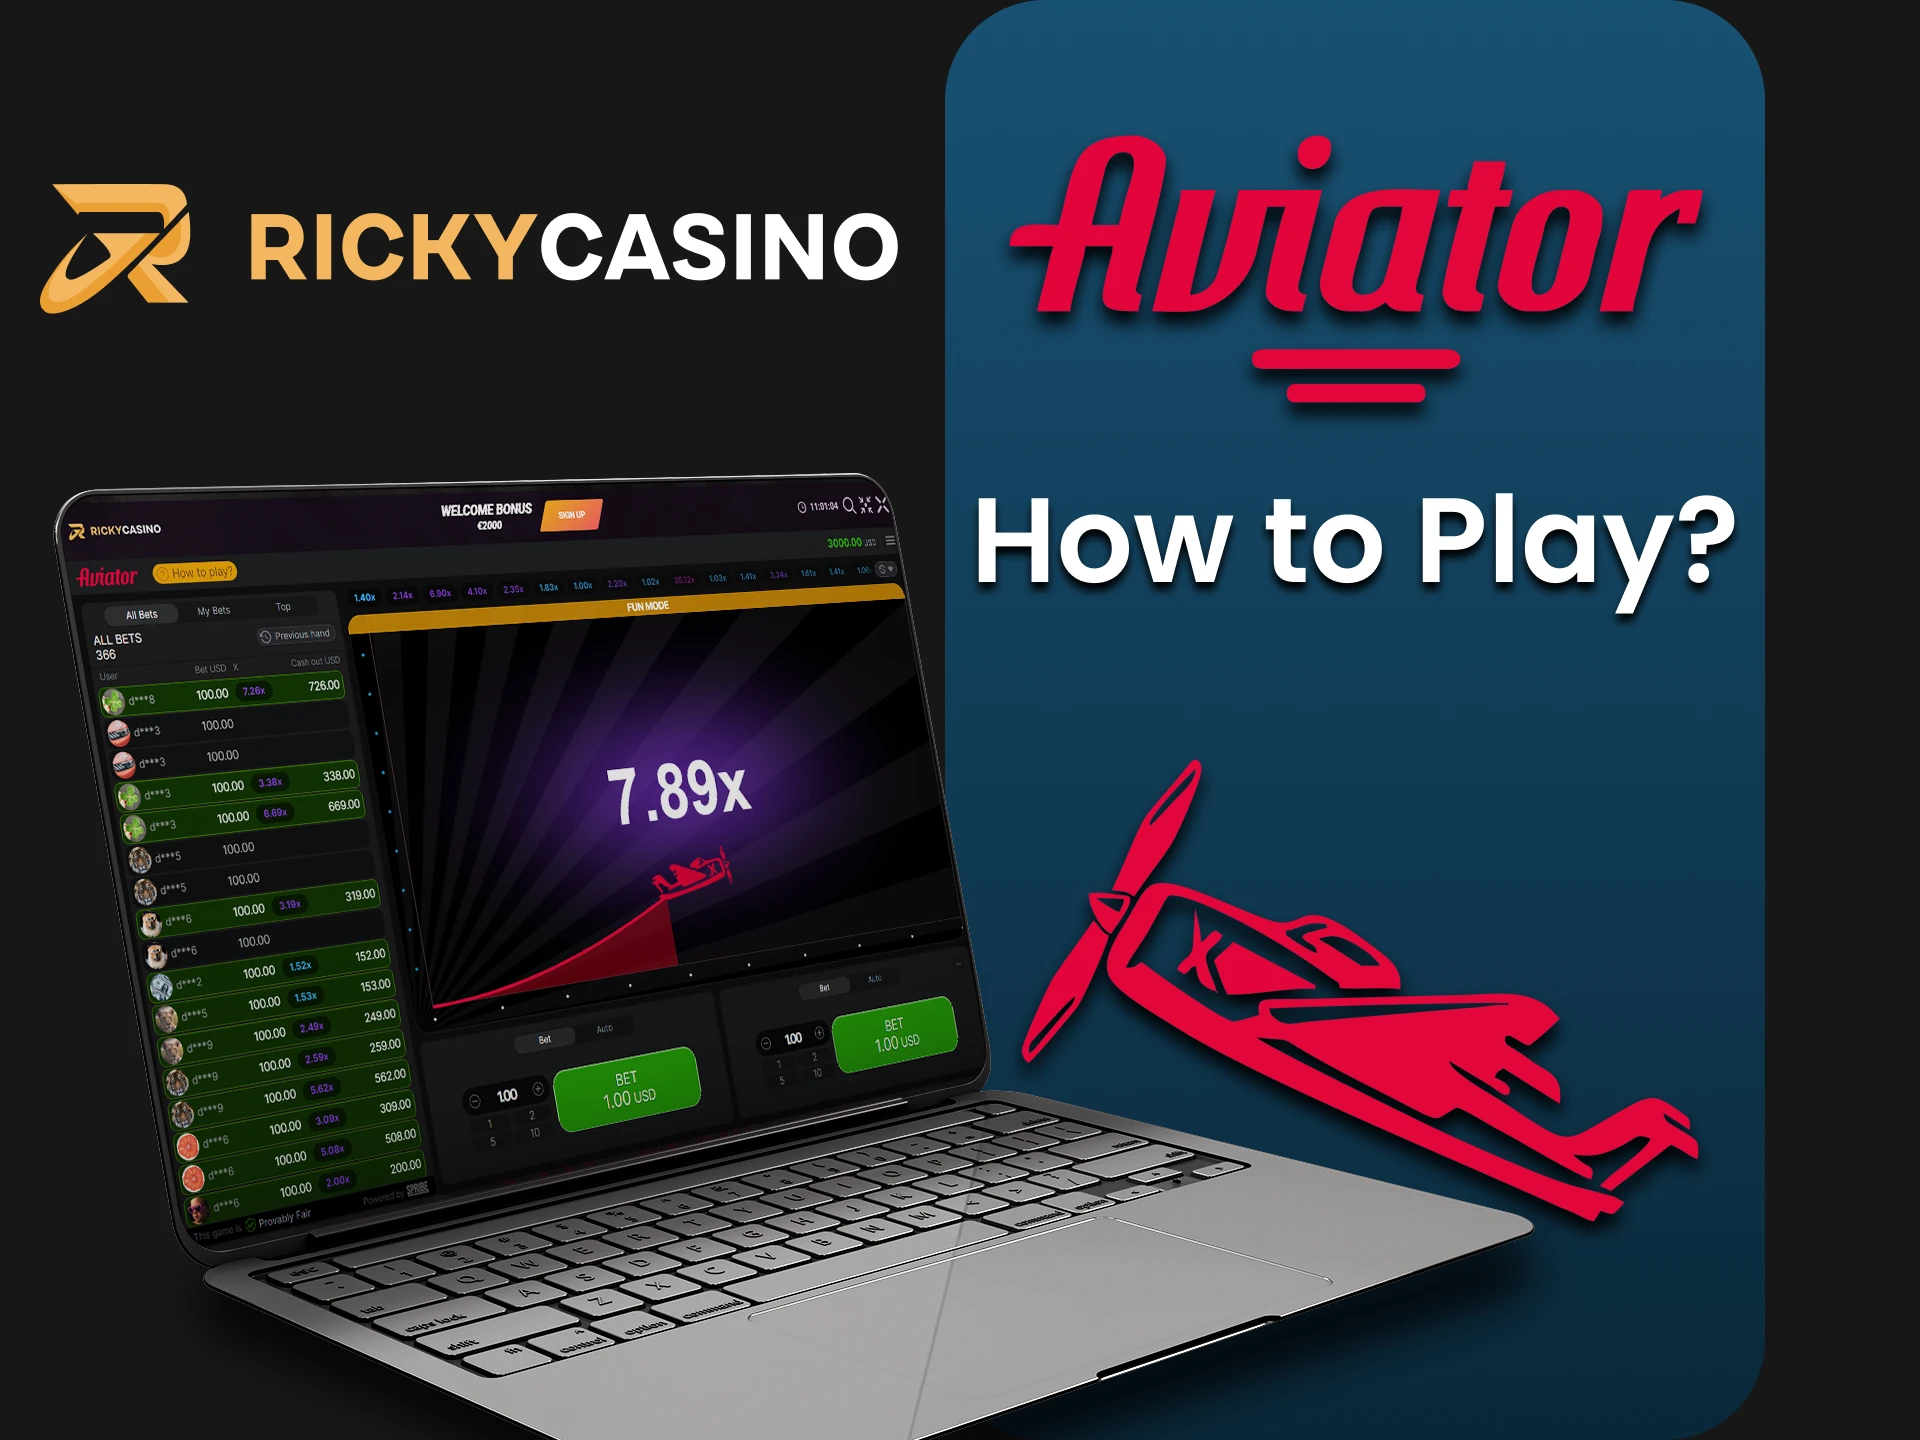 Go to the Ricky Casino section to play Aviator.